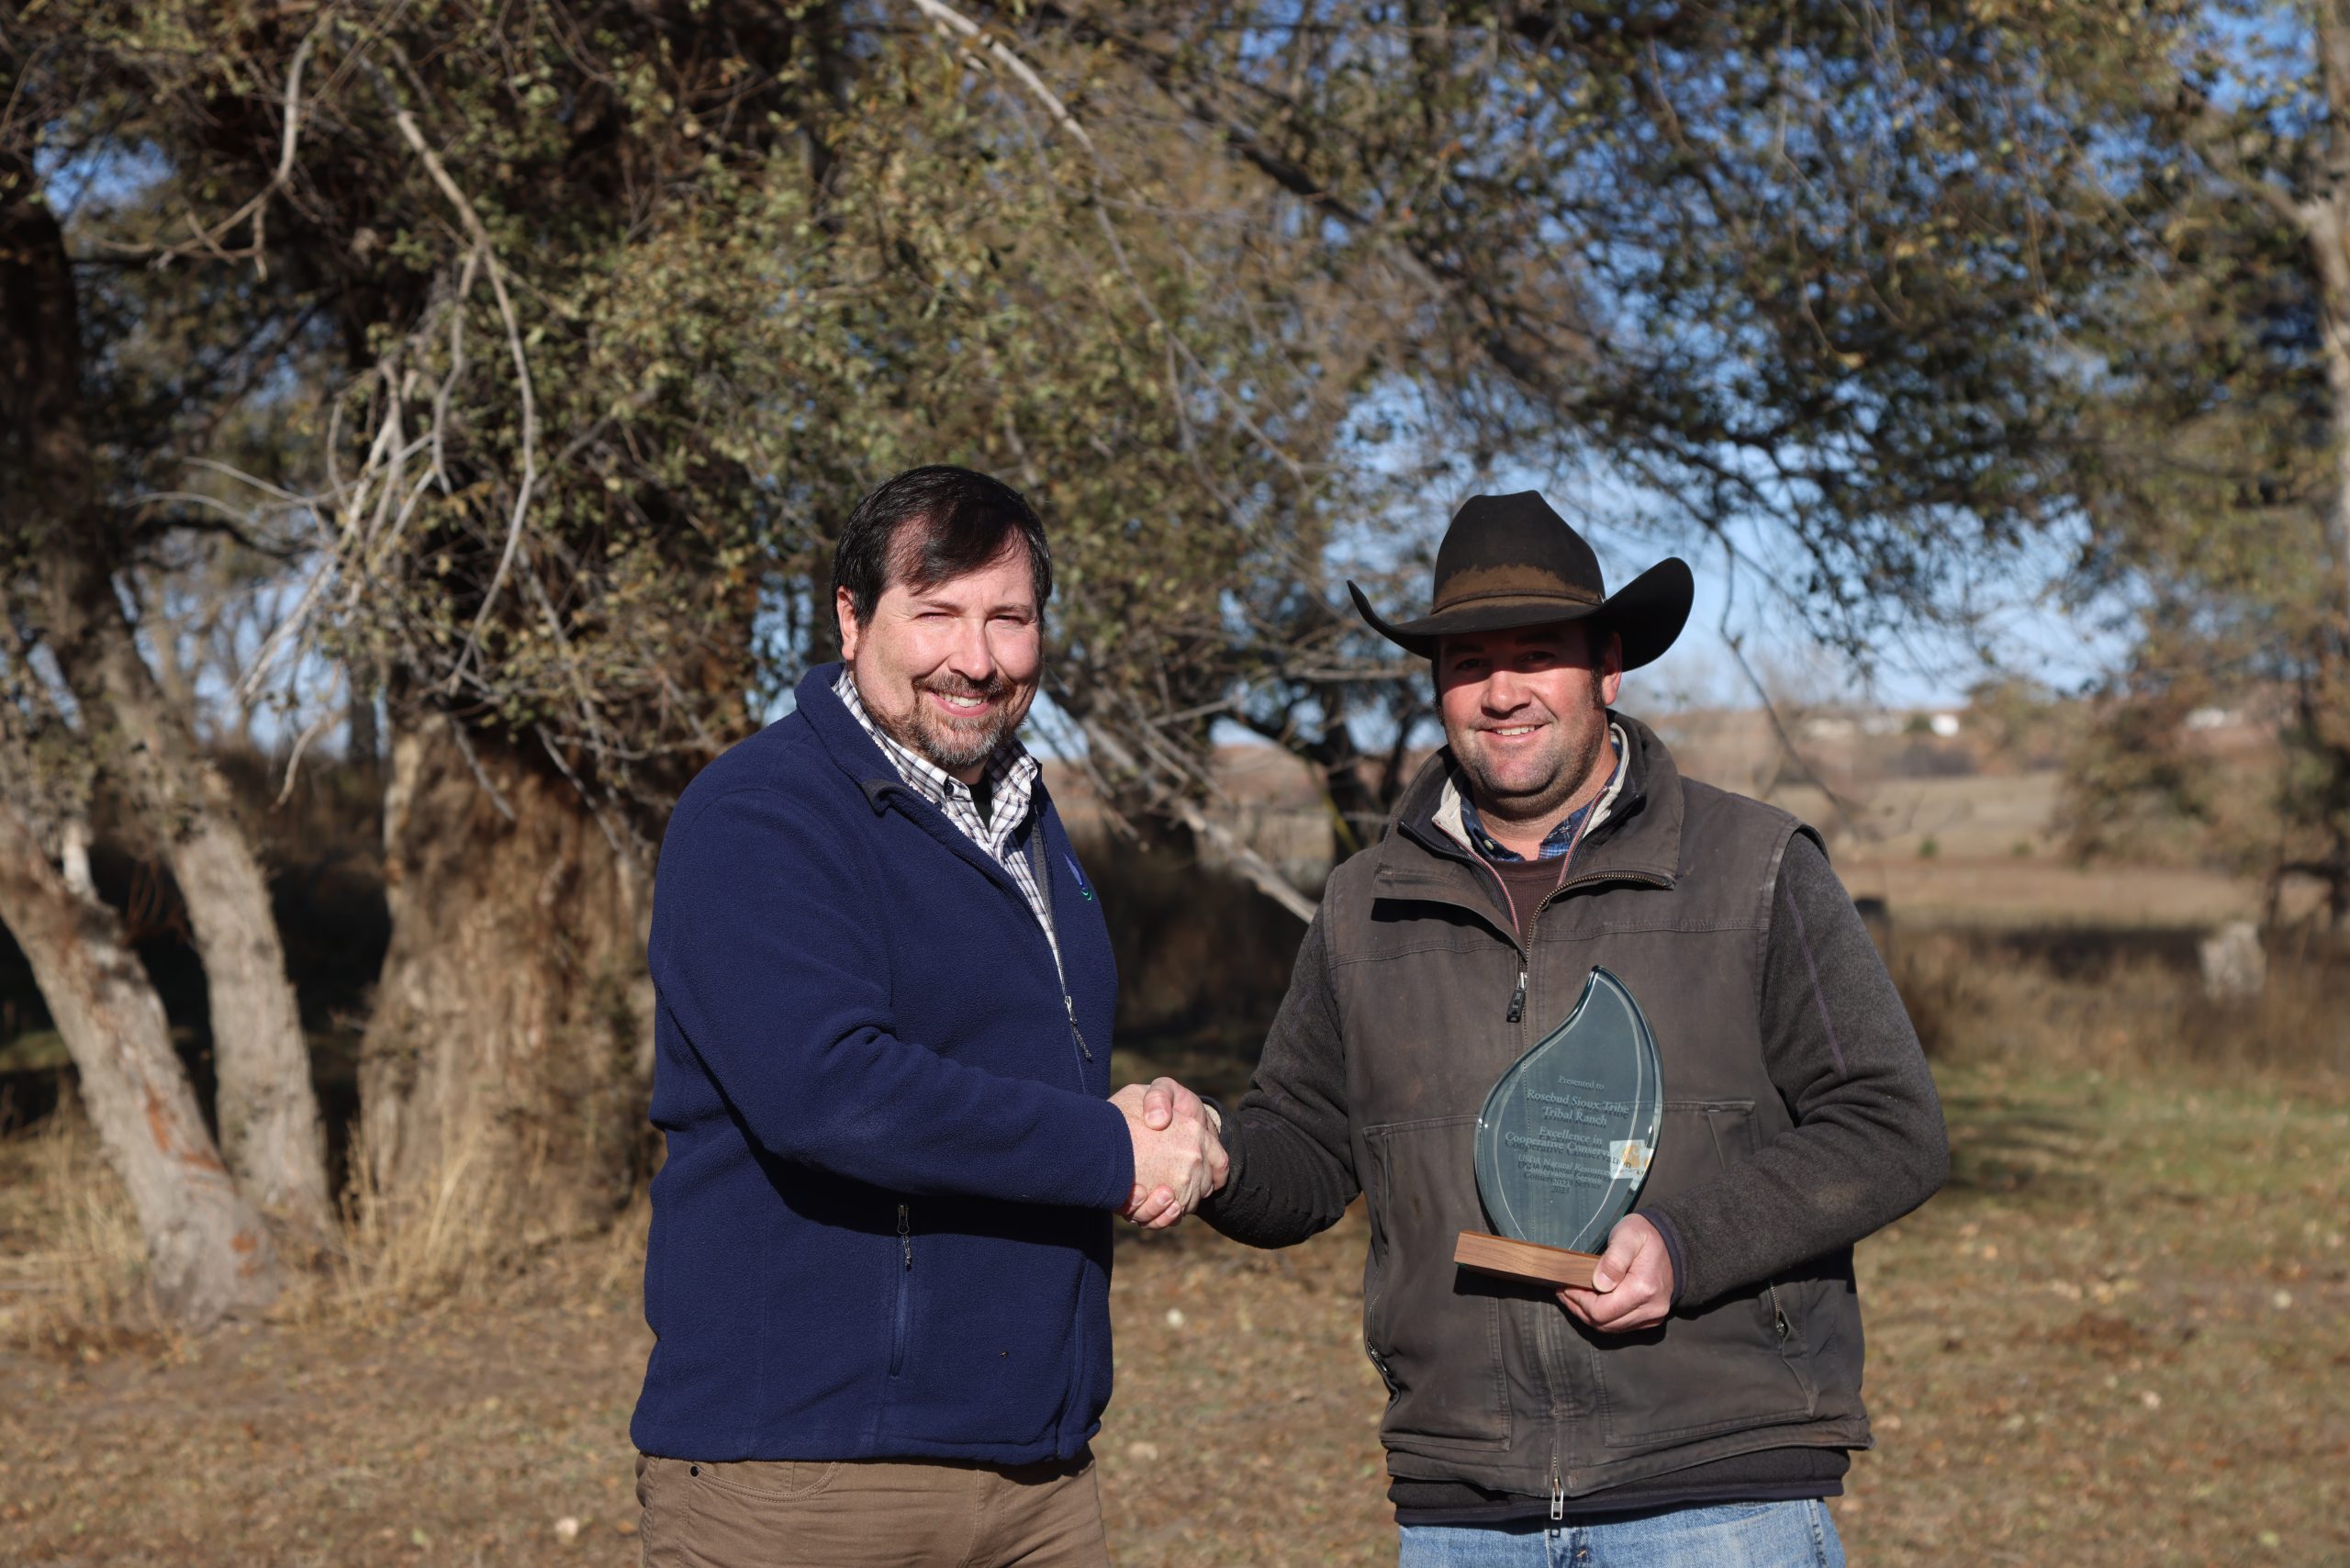 State Conservationist Tony Sunseri awards the Rosebud Sioux Tribe the Excellence in Cooperative Conservation Award. Pictured from left to right is Sunseri and Ranch Manager Joe Ross. (Photo courtesy of U.S. Department of Agriculture Natural Resources Conservation Service.)